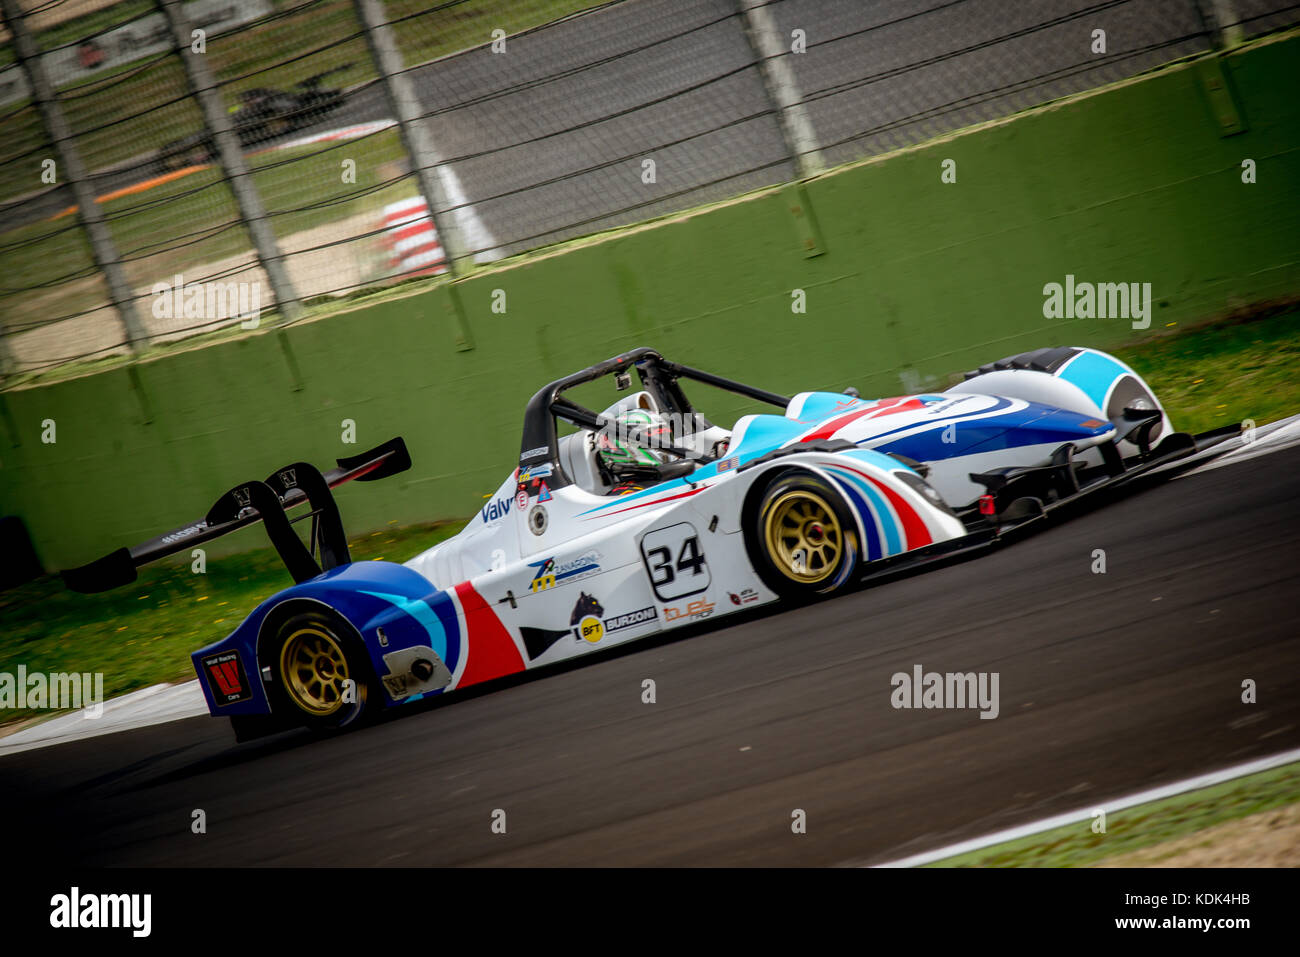 Prototype car in action at turn during the race blurred background Stock Photo